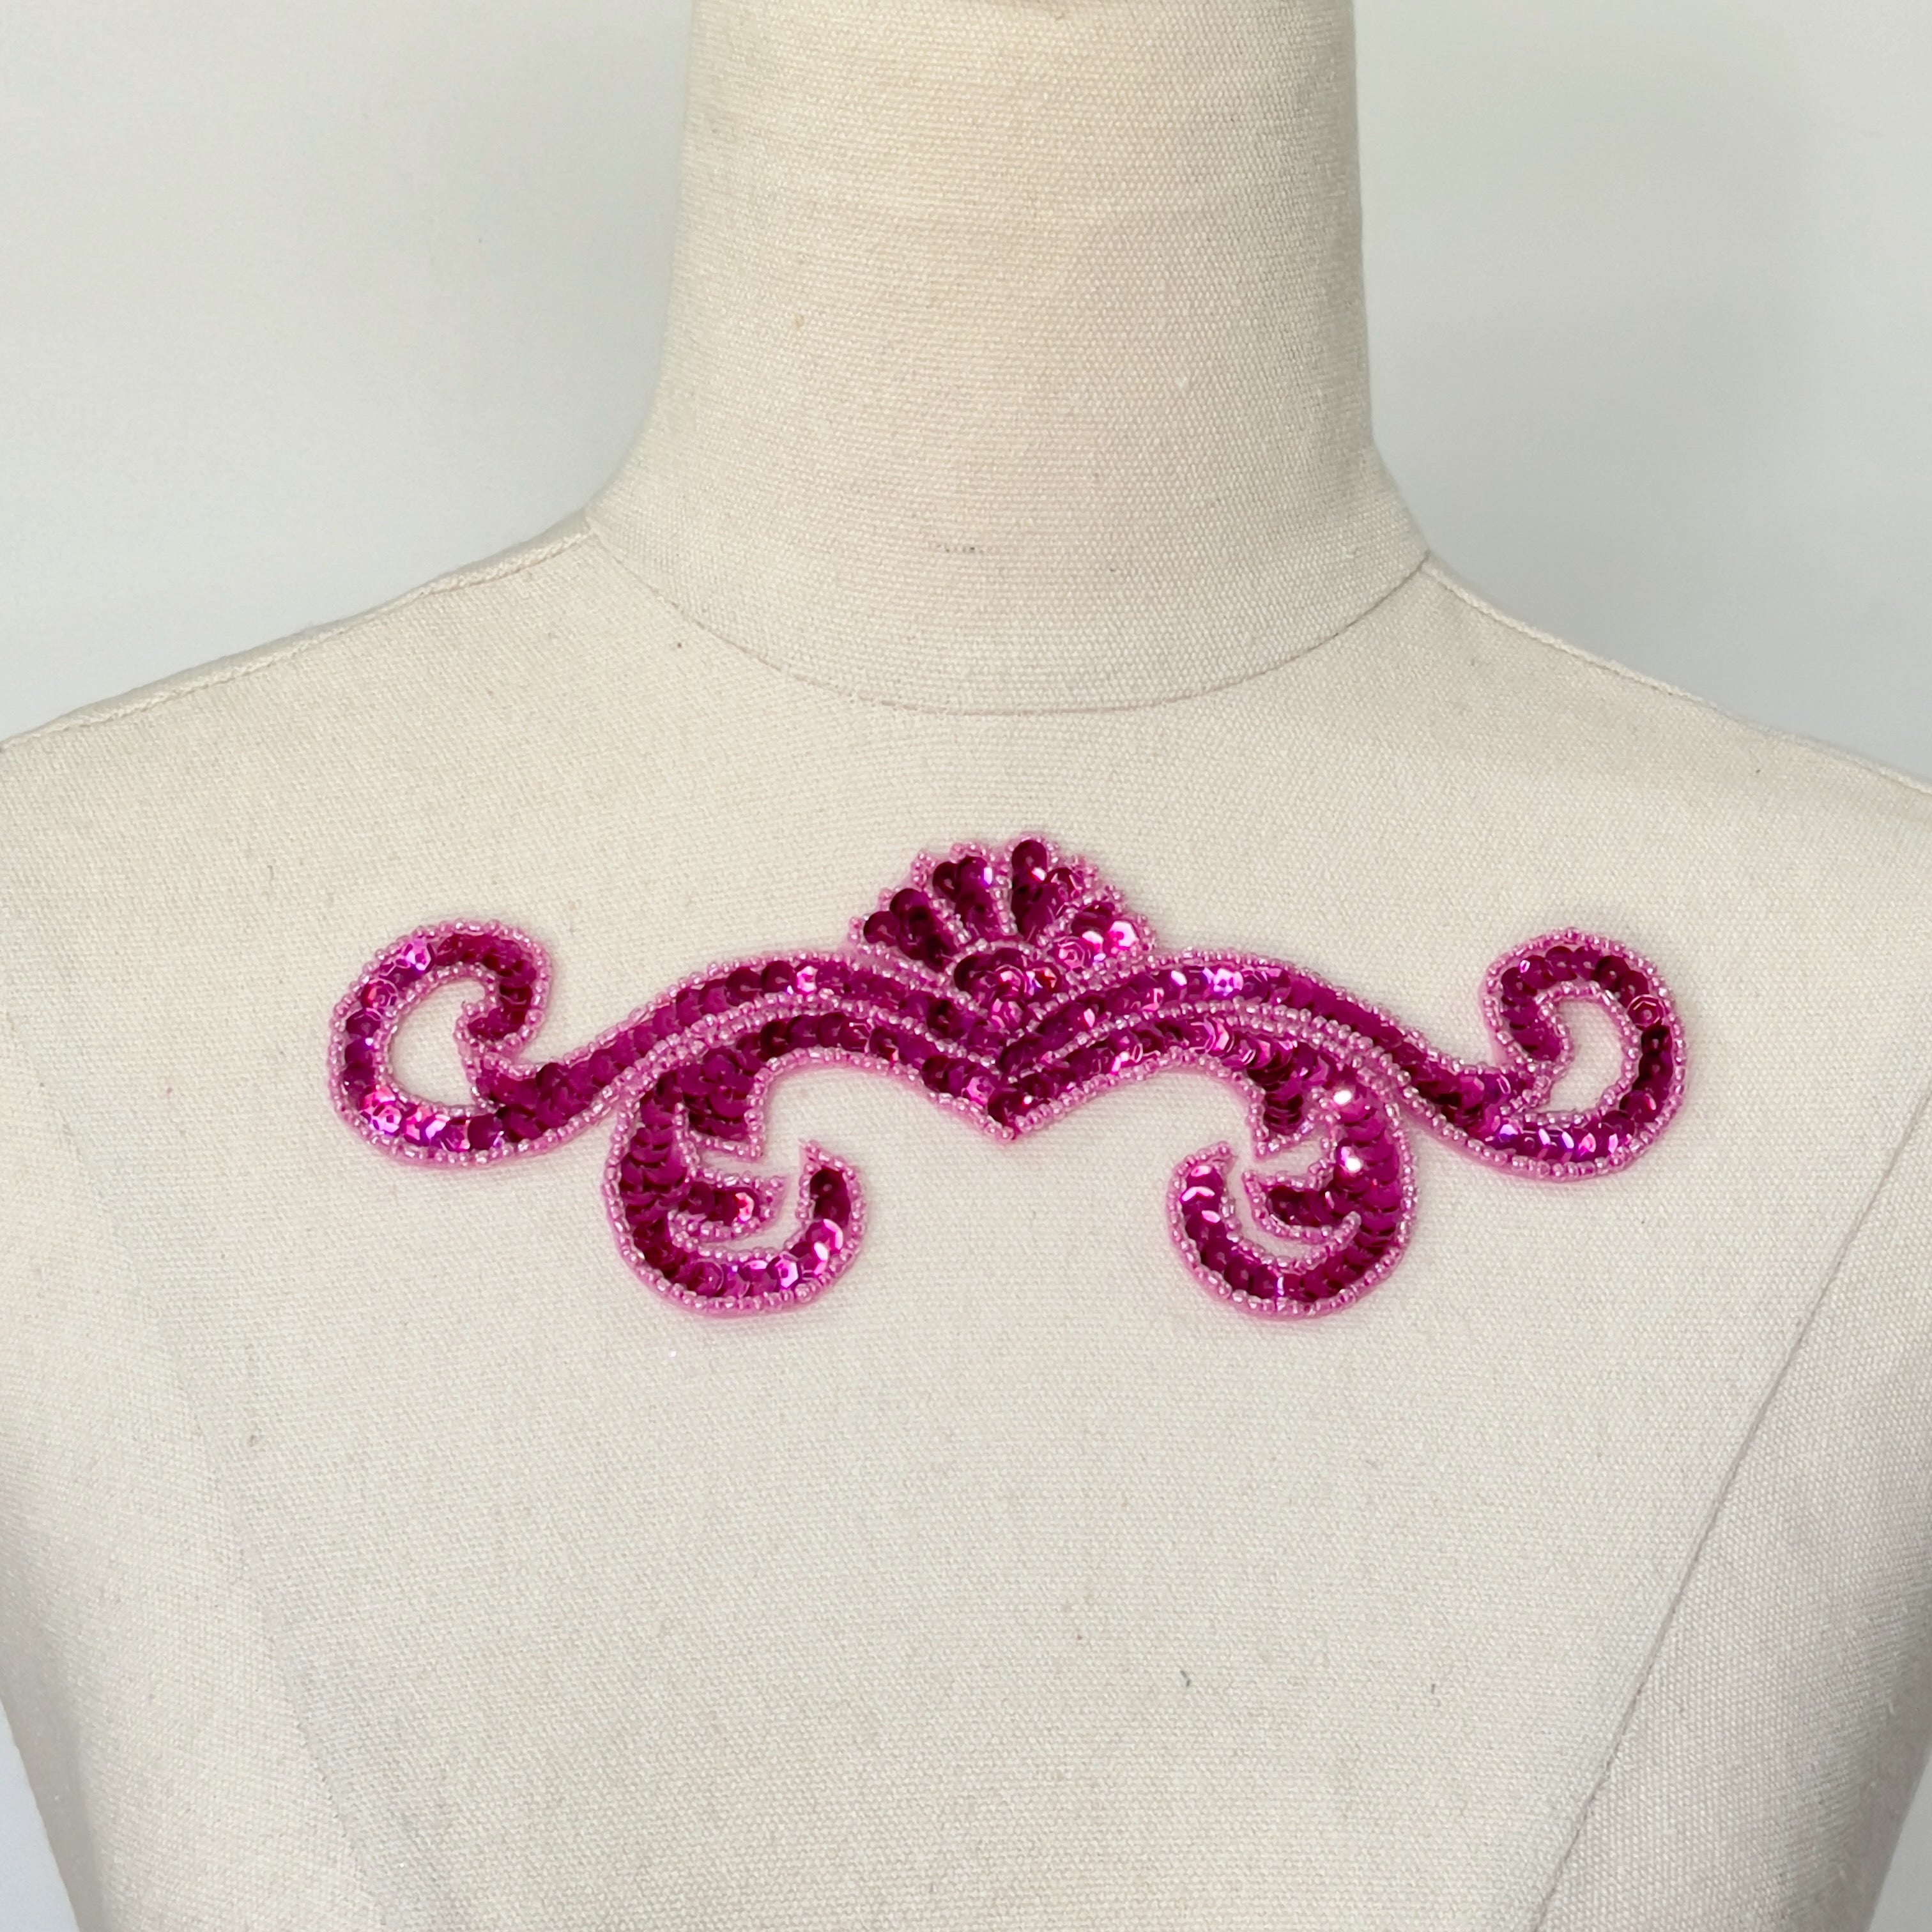 Single fuchsia sequin scroll bodice applique filed with fuchsia sequins and edged with fuchsia seed beads displayed on a mannequin.